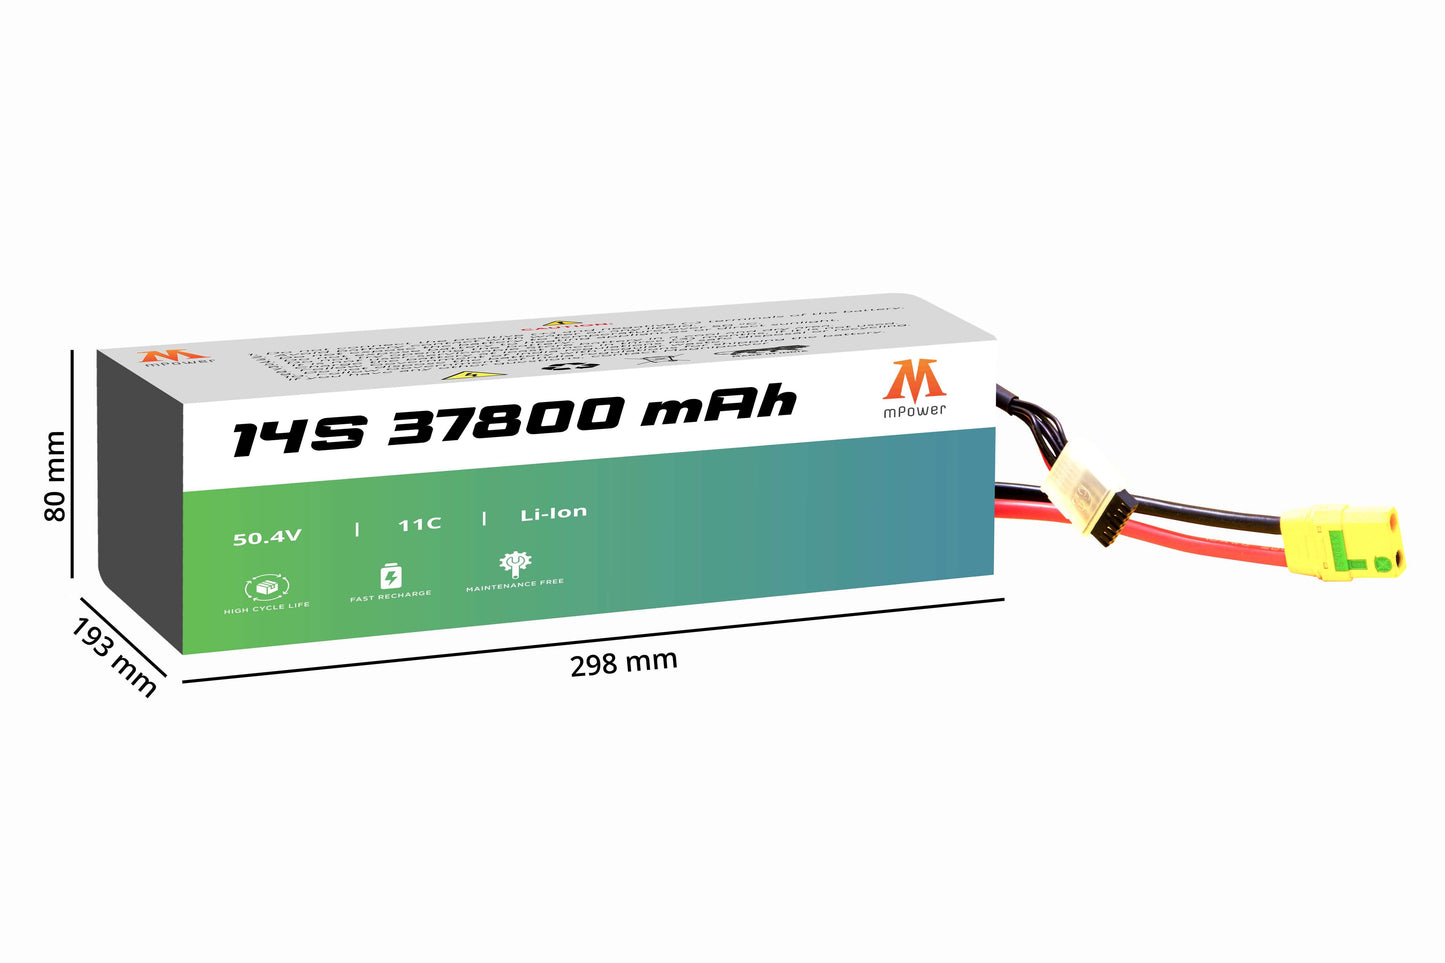 mPower 14S 37800mAh Lithium-Ion Battery for Delivery Drones-mpowerlithium